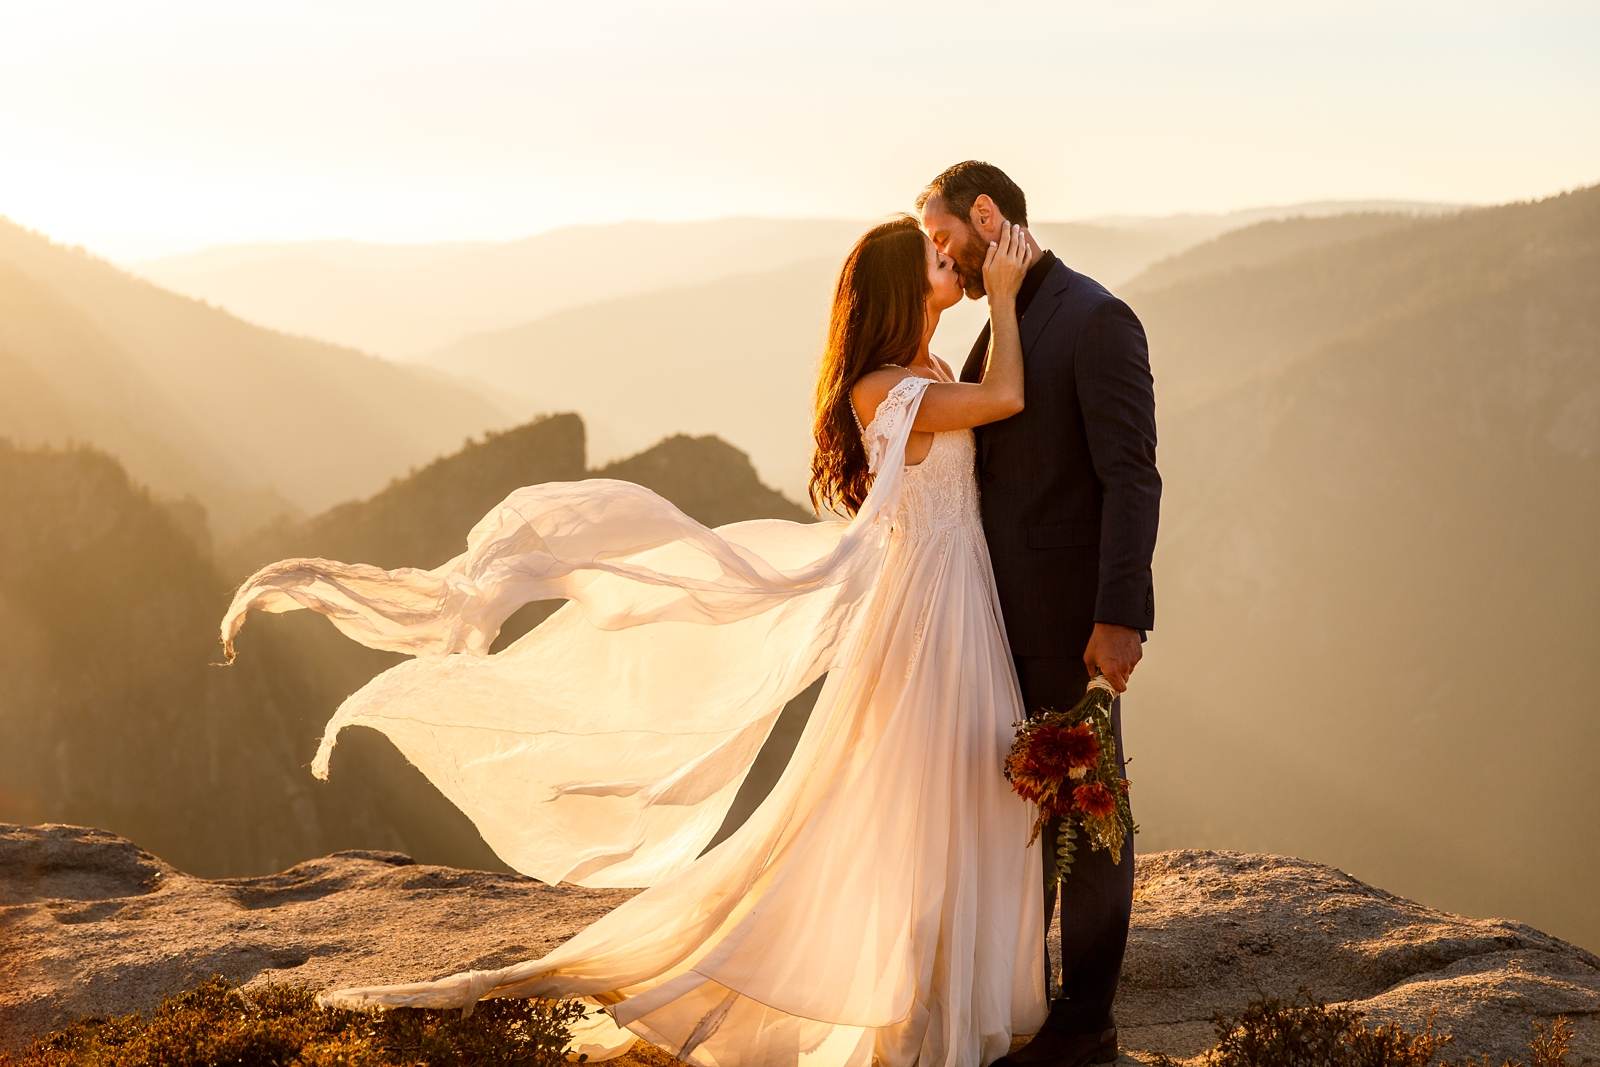 Wind blowing the wedding dress perfectly at this couple's Yosemite elopement.